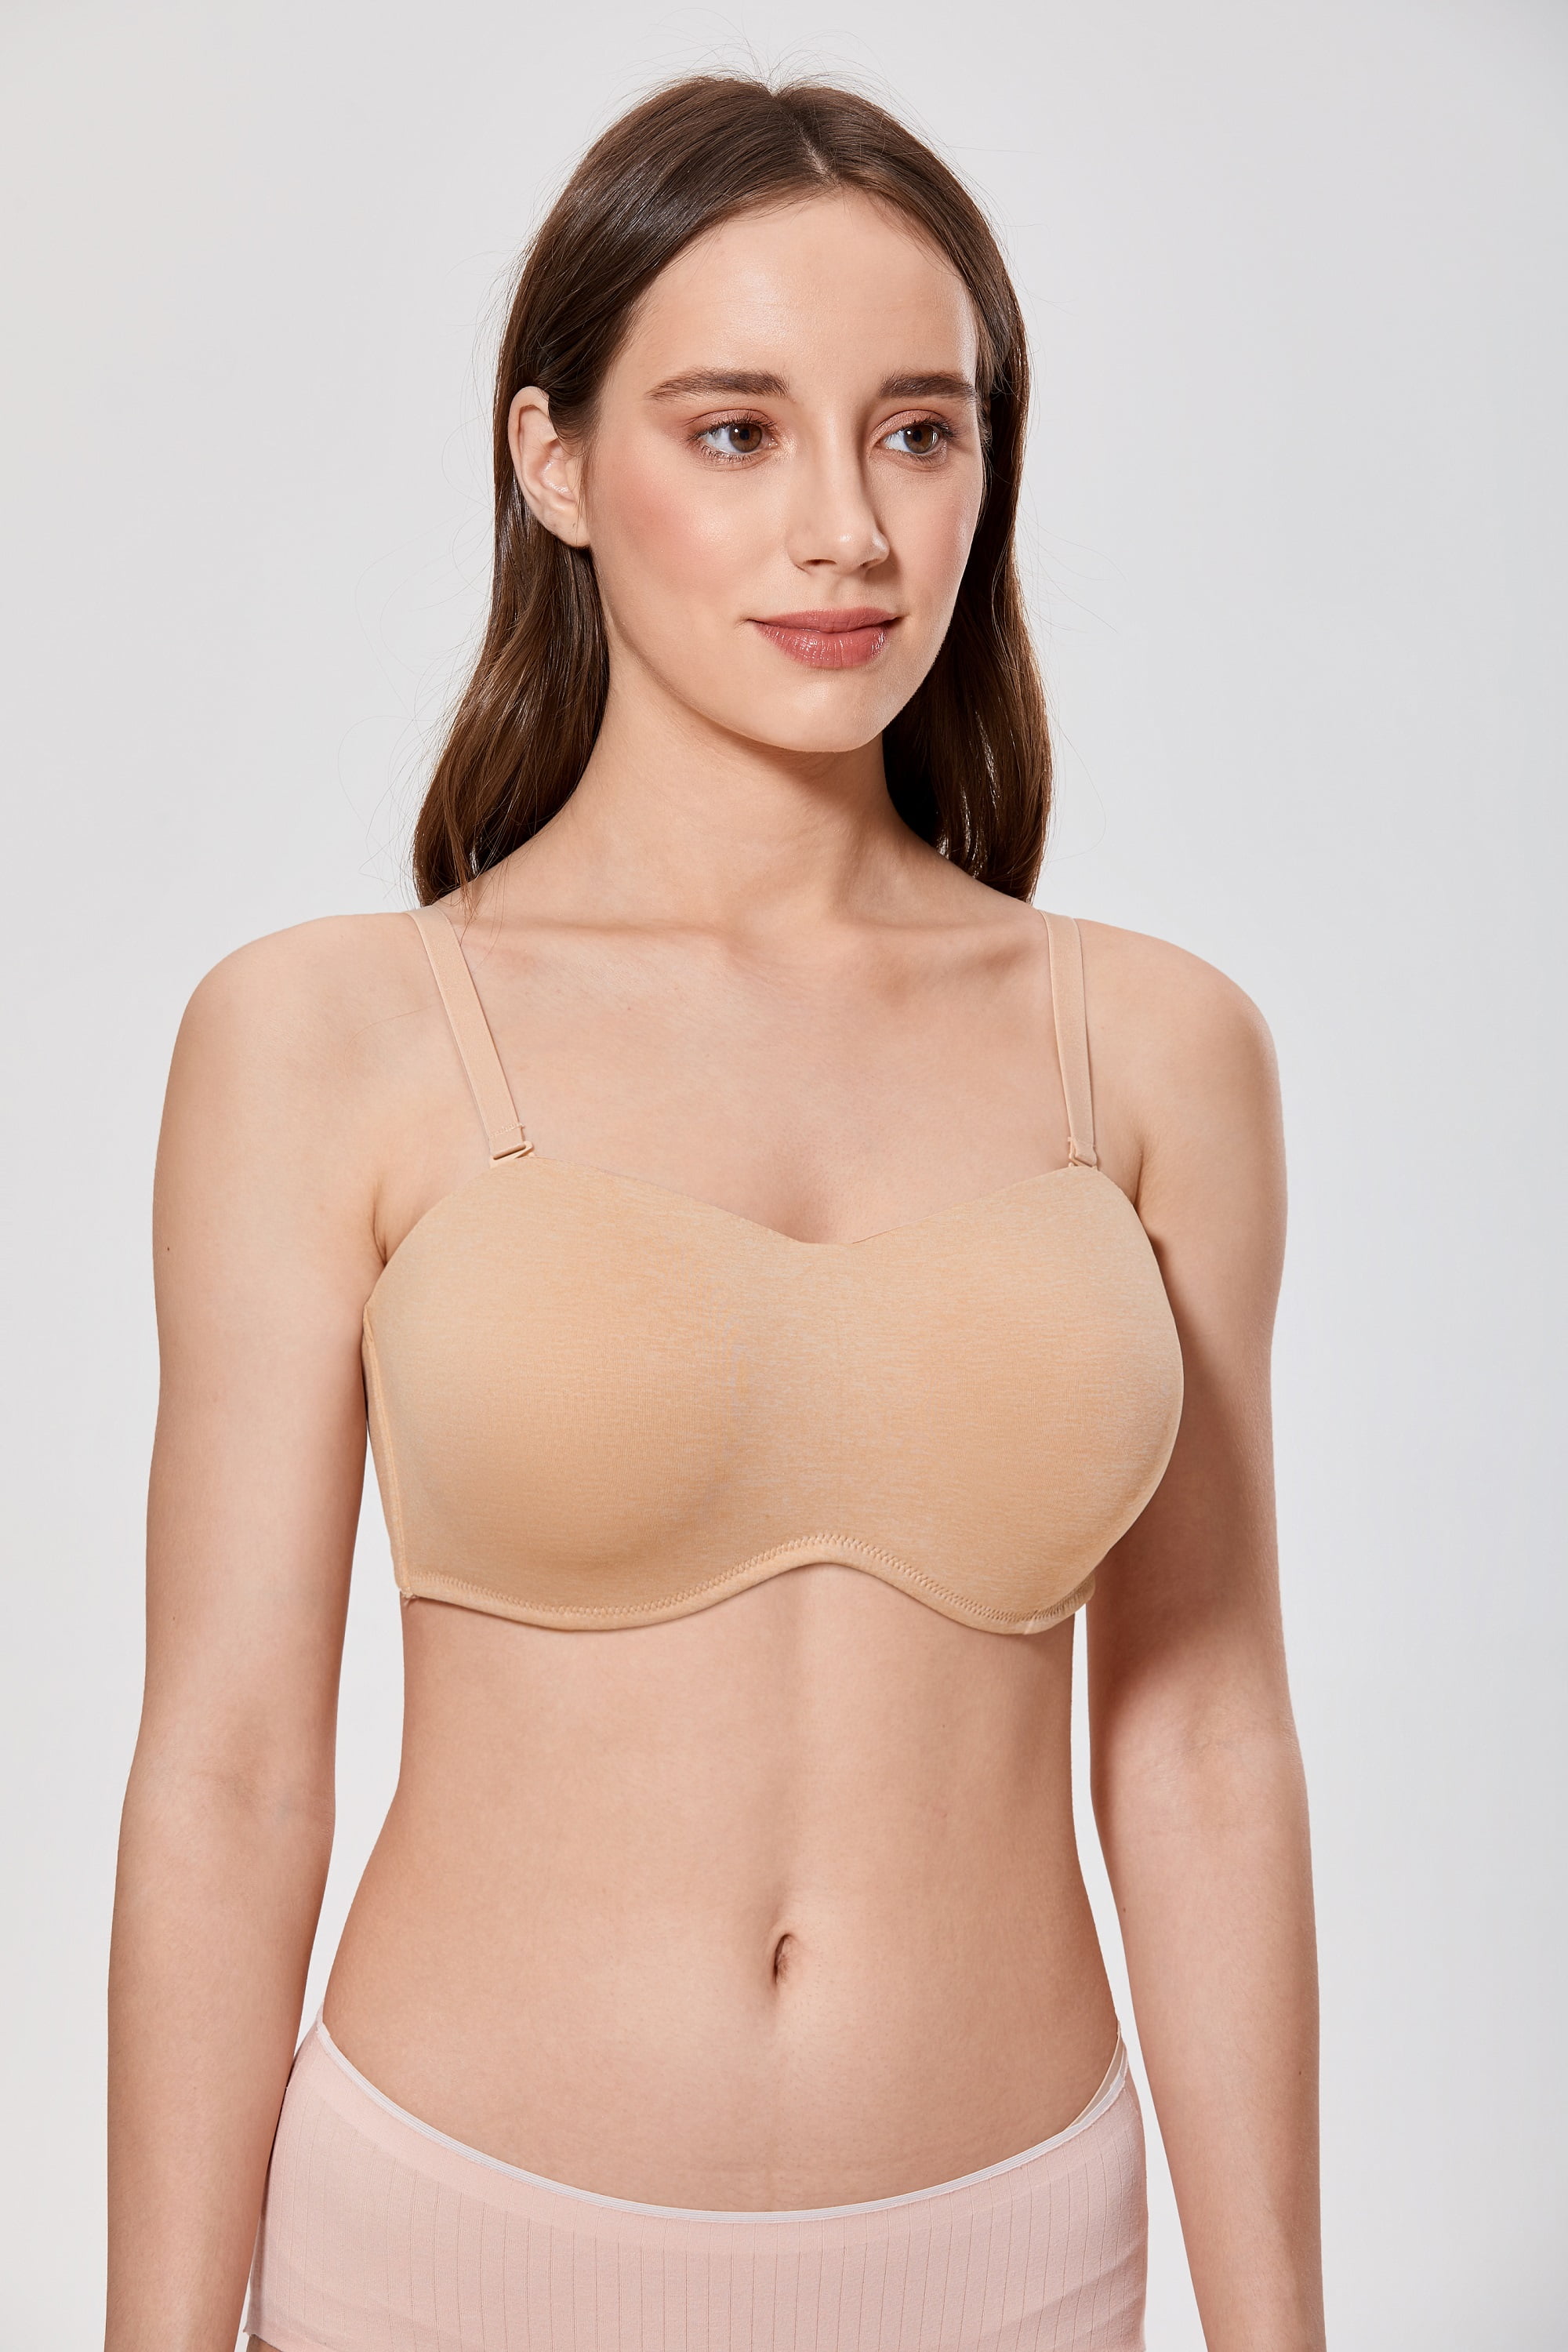 Strapless Multiway Bra Delimira Underwired Supportive Padded 42f ref 13a